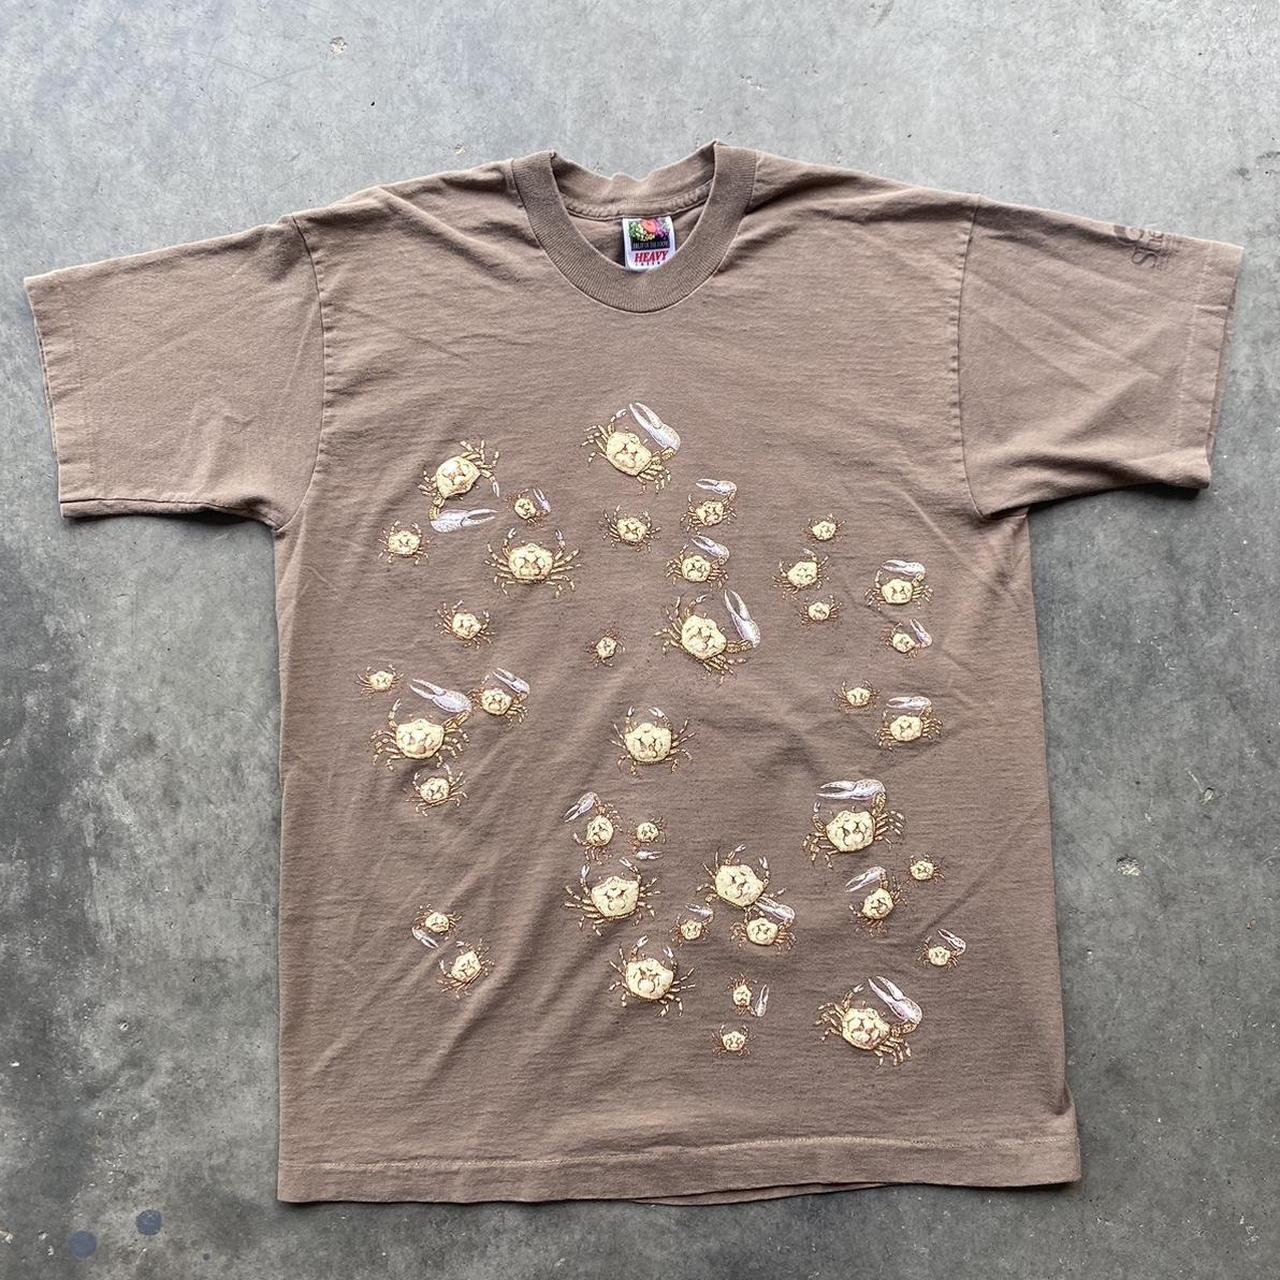 Fruit of the Loom Men's Brown and Cream T-shirt